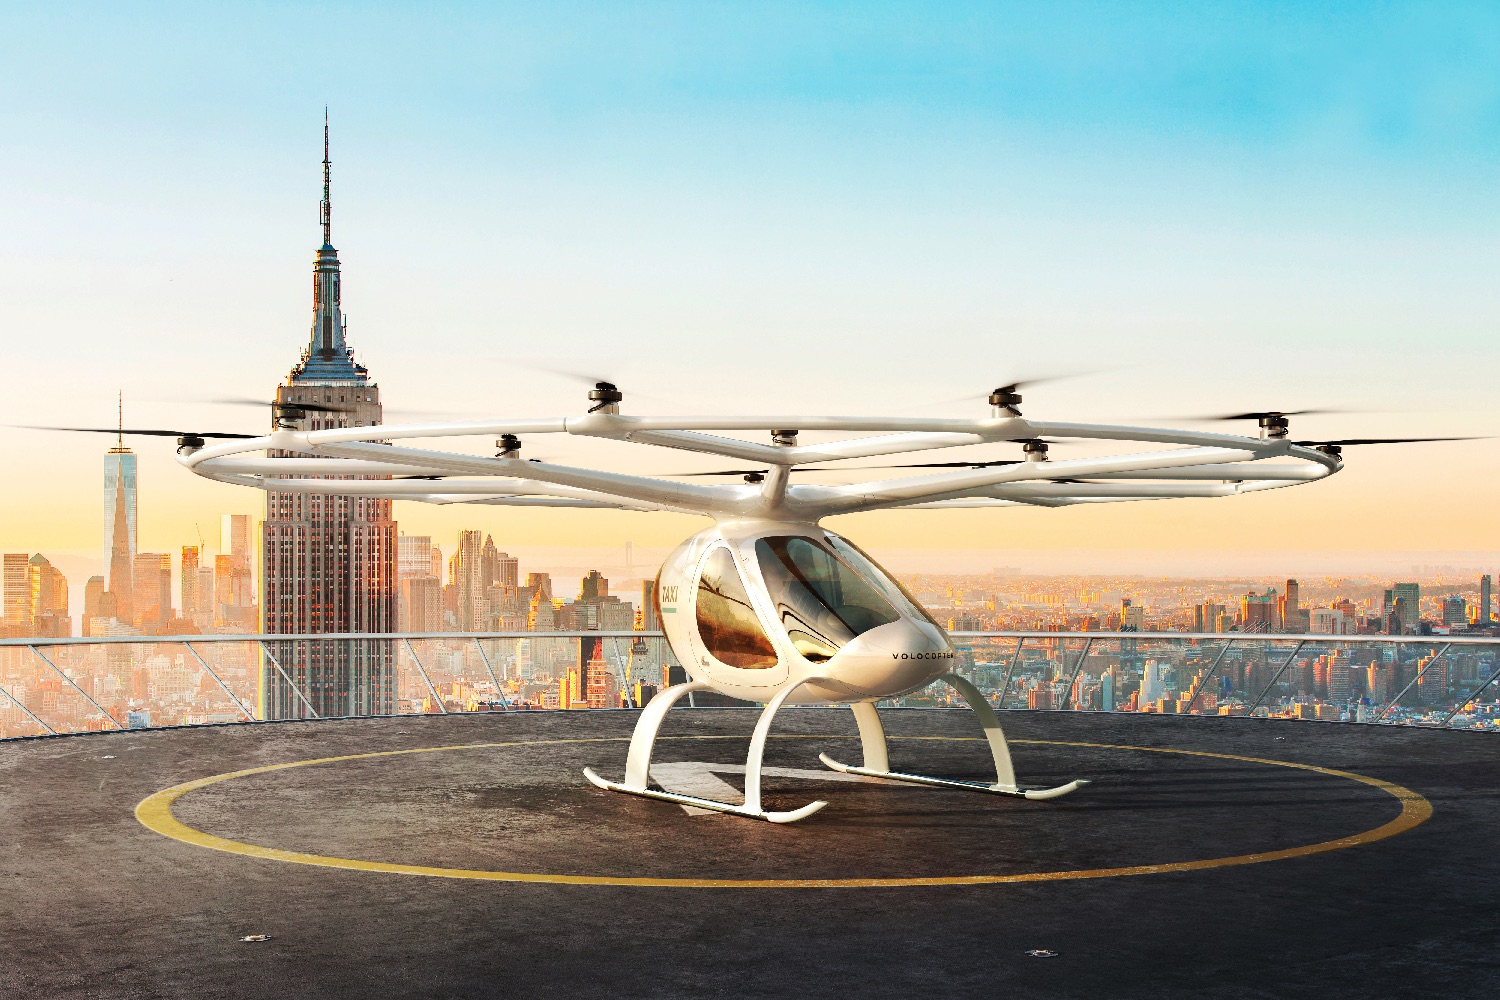 volocopter singapore tests 2019 volocopter1